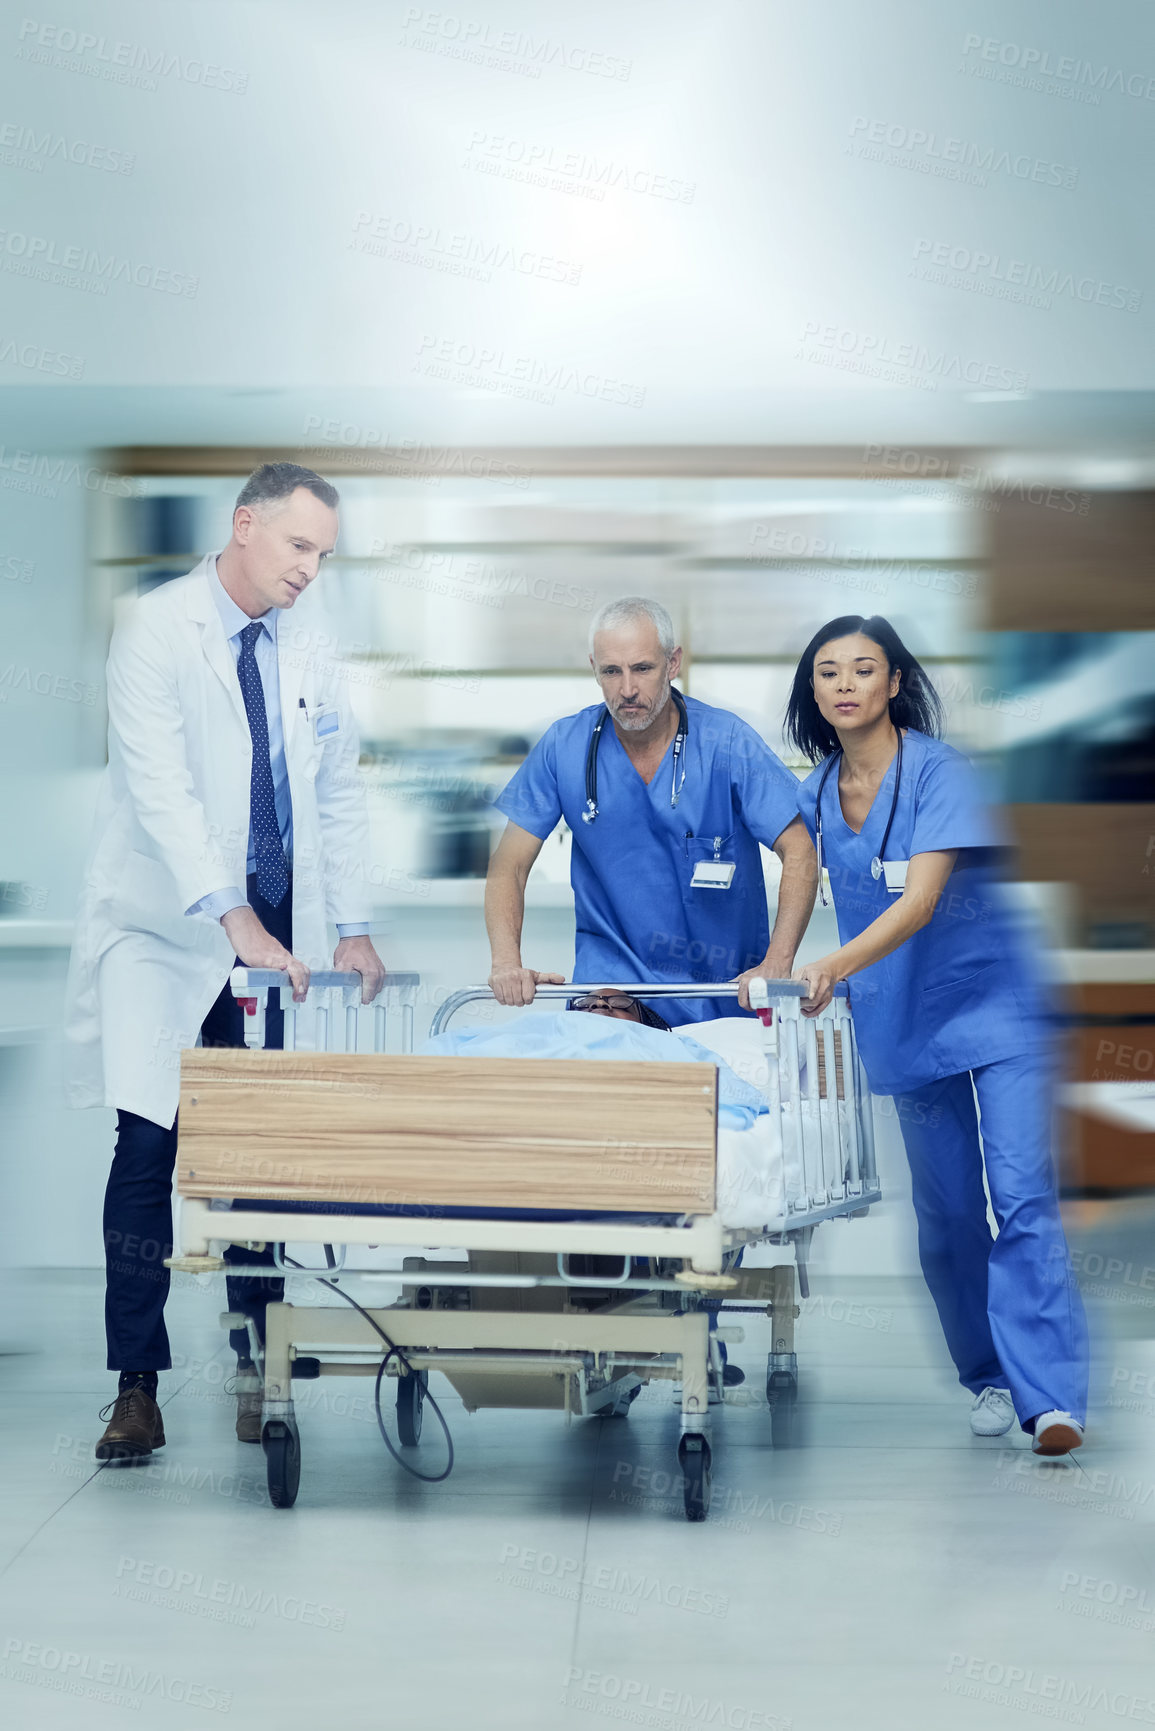 Buy stock photo Shot of a group of medical professionals rushing a patient on a gurney down a hospital corridor